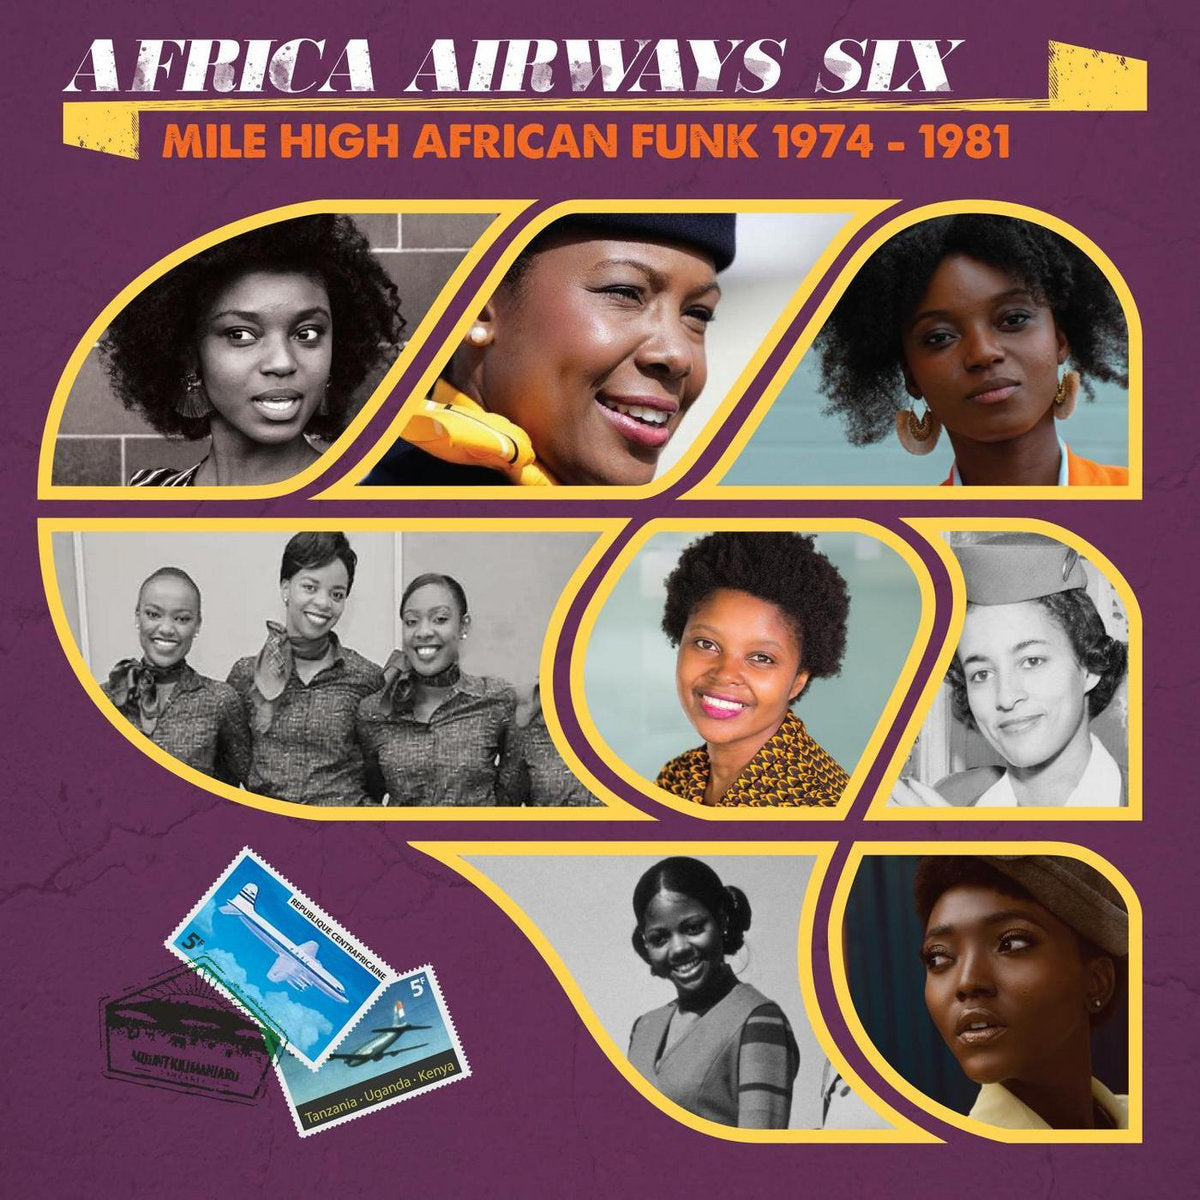 Africa Airways Six (Mile High African Funk 1974-1981) (New LP)